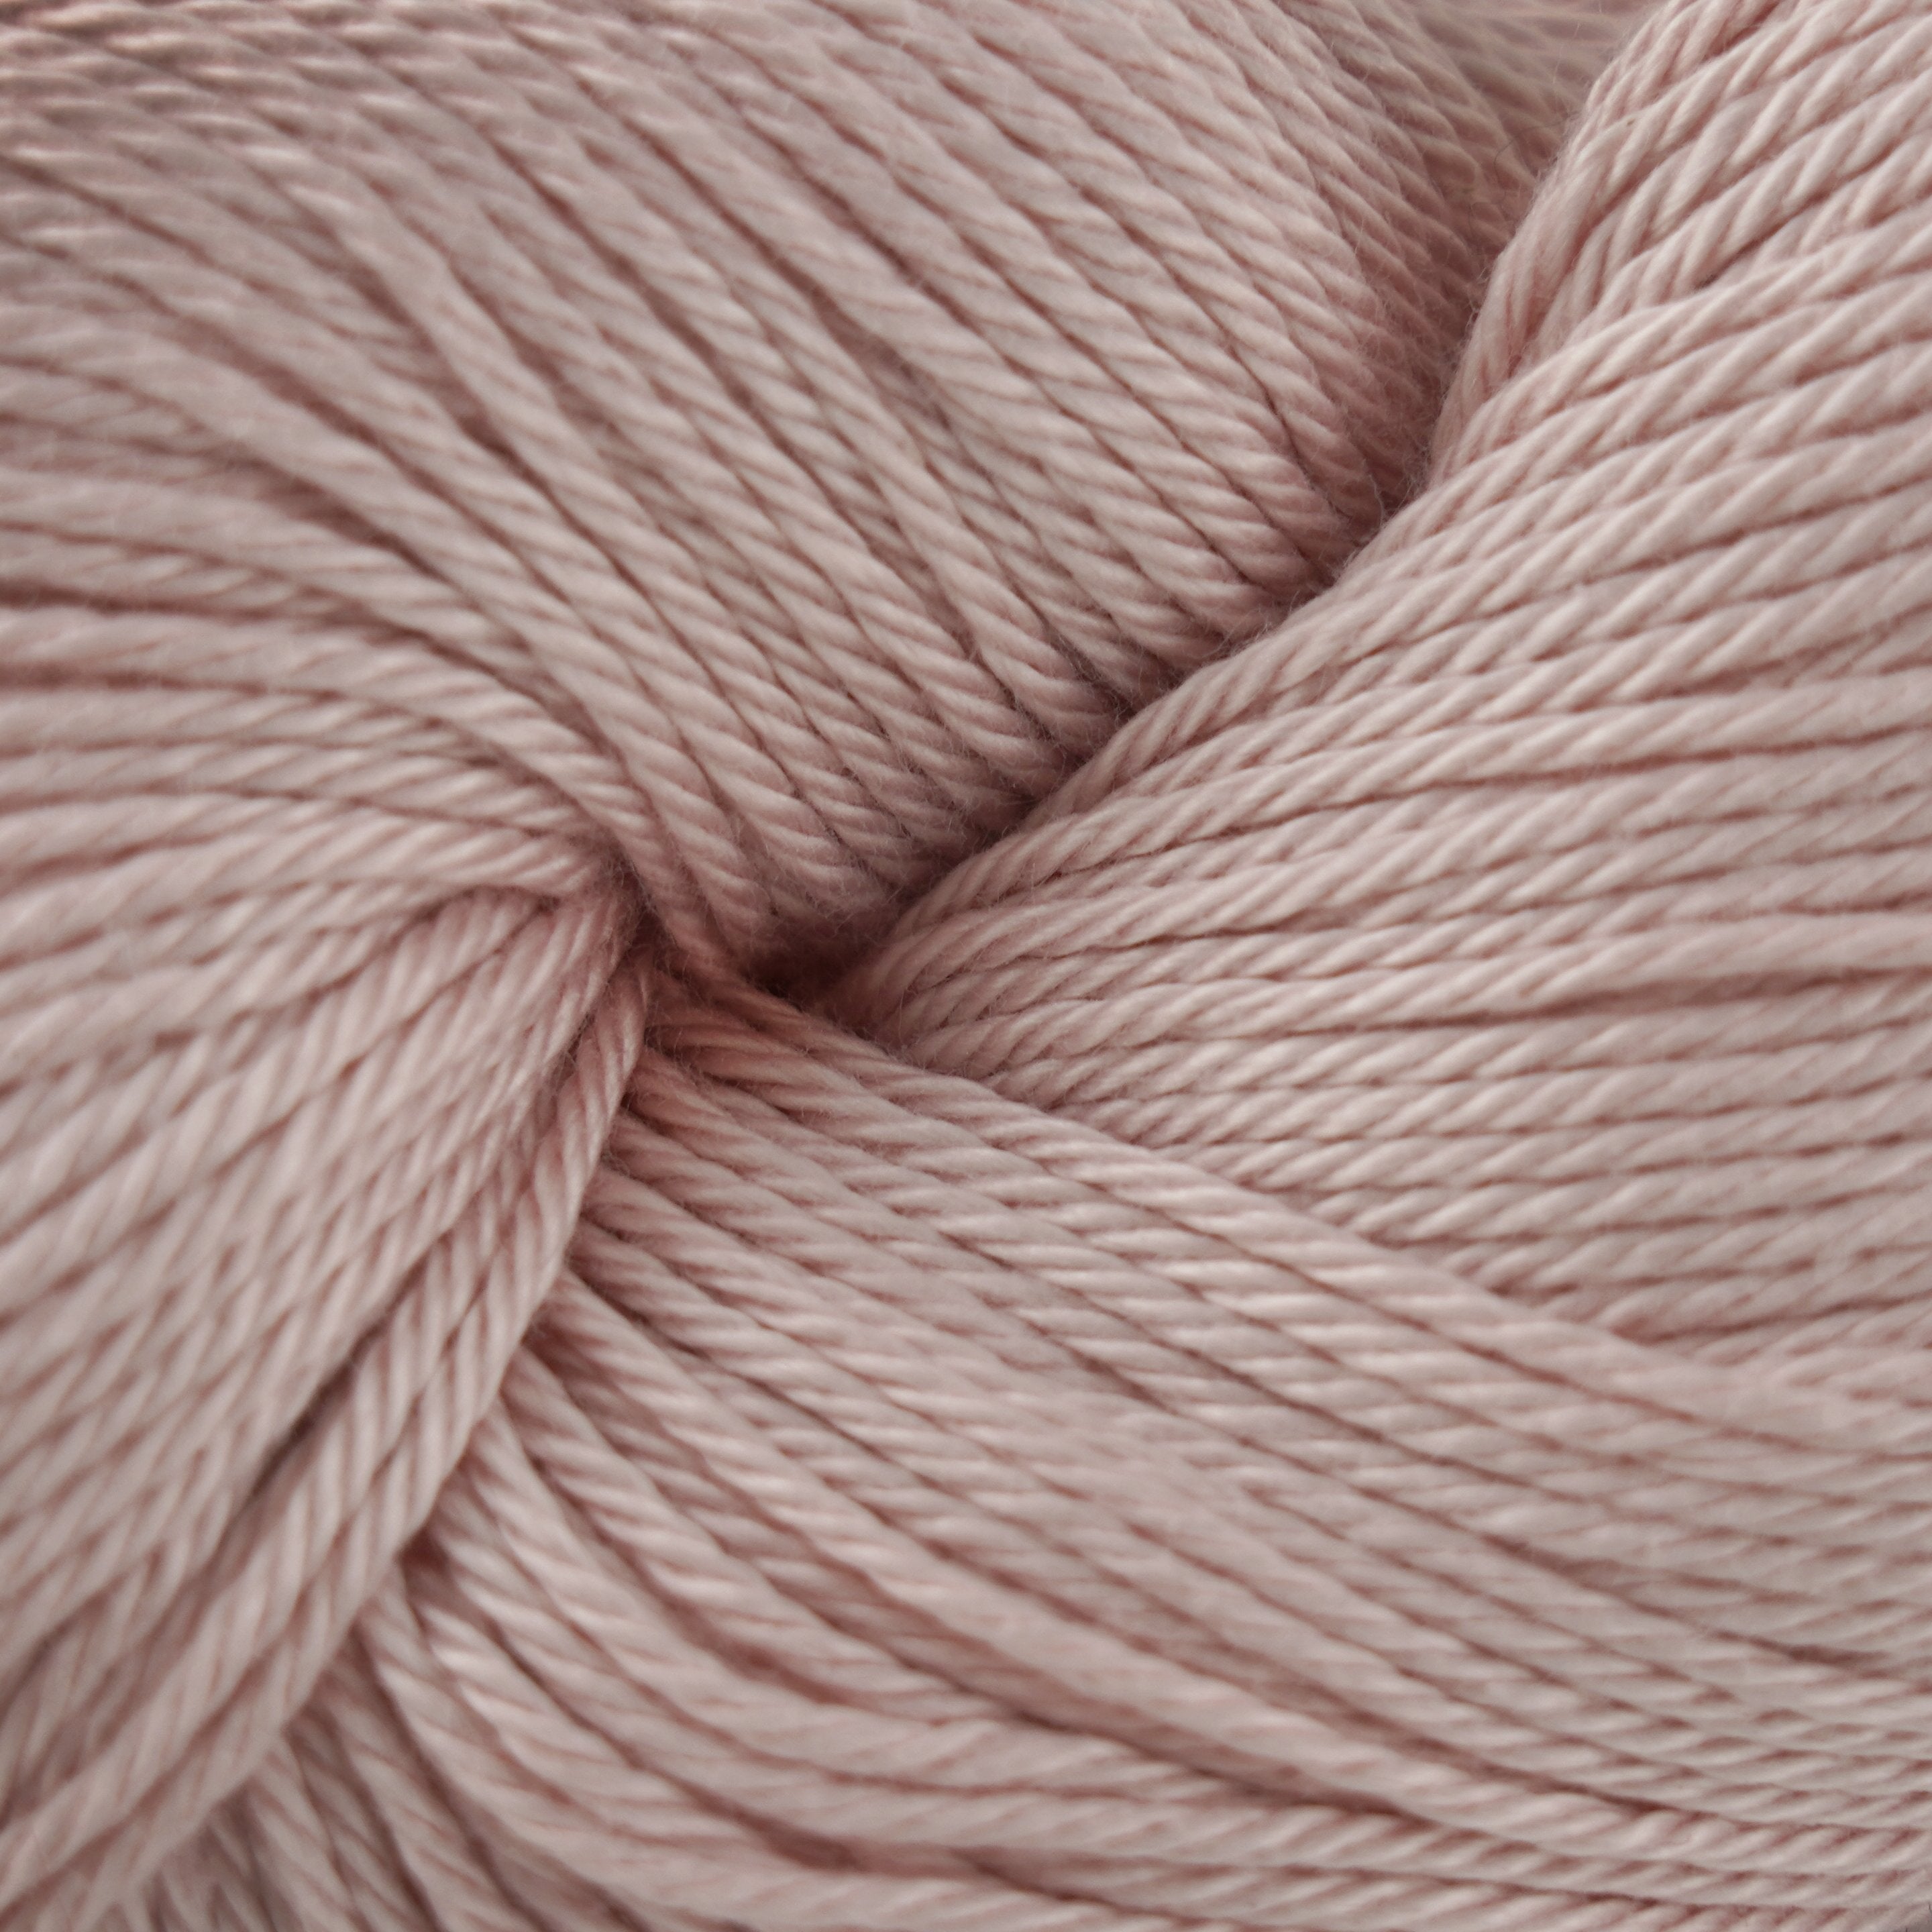 Skein of Cascade Ultra Pima DK weight yarn in the color Veiled Rose (Pink) for knitting and crocheting.